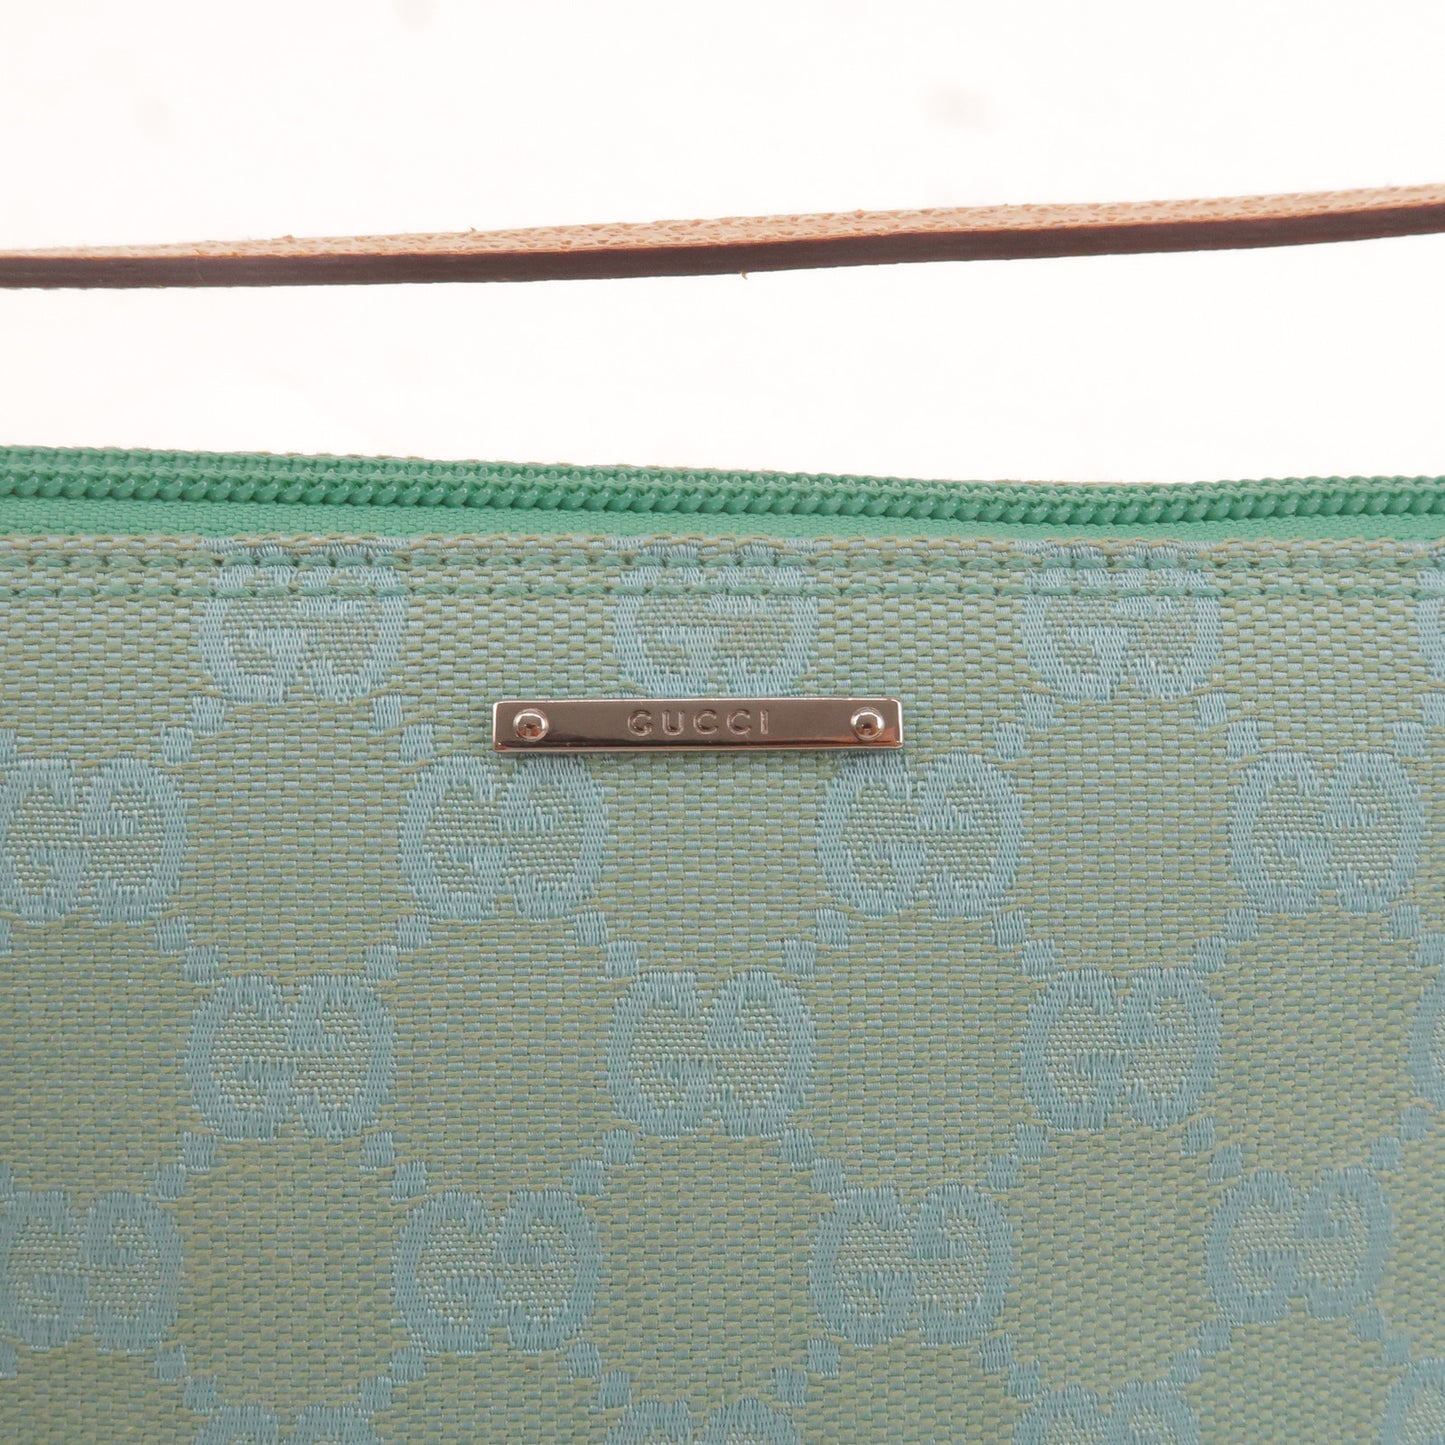 GUCCI GG Canvas Leather Boat Bag Hand Bag Emerald Green 07198